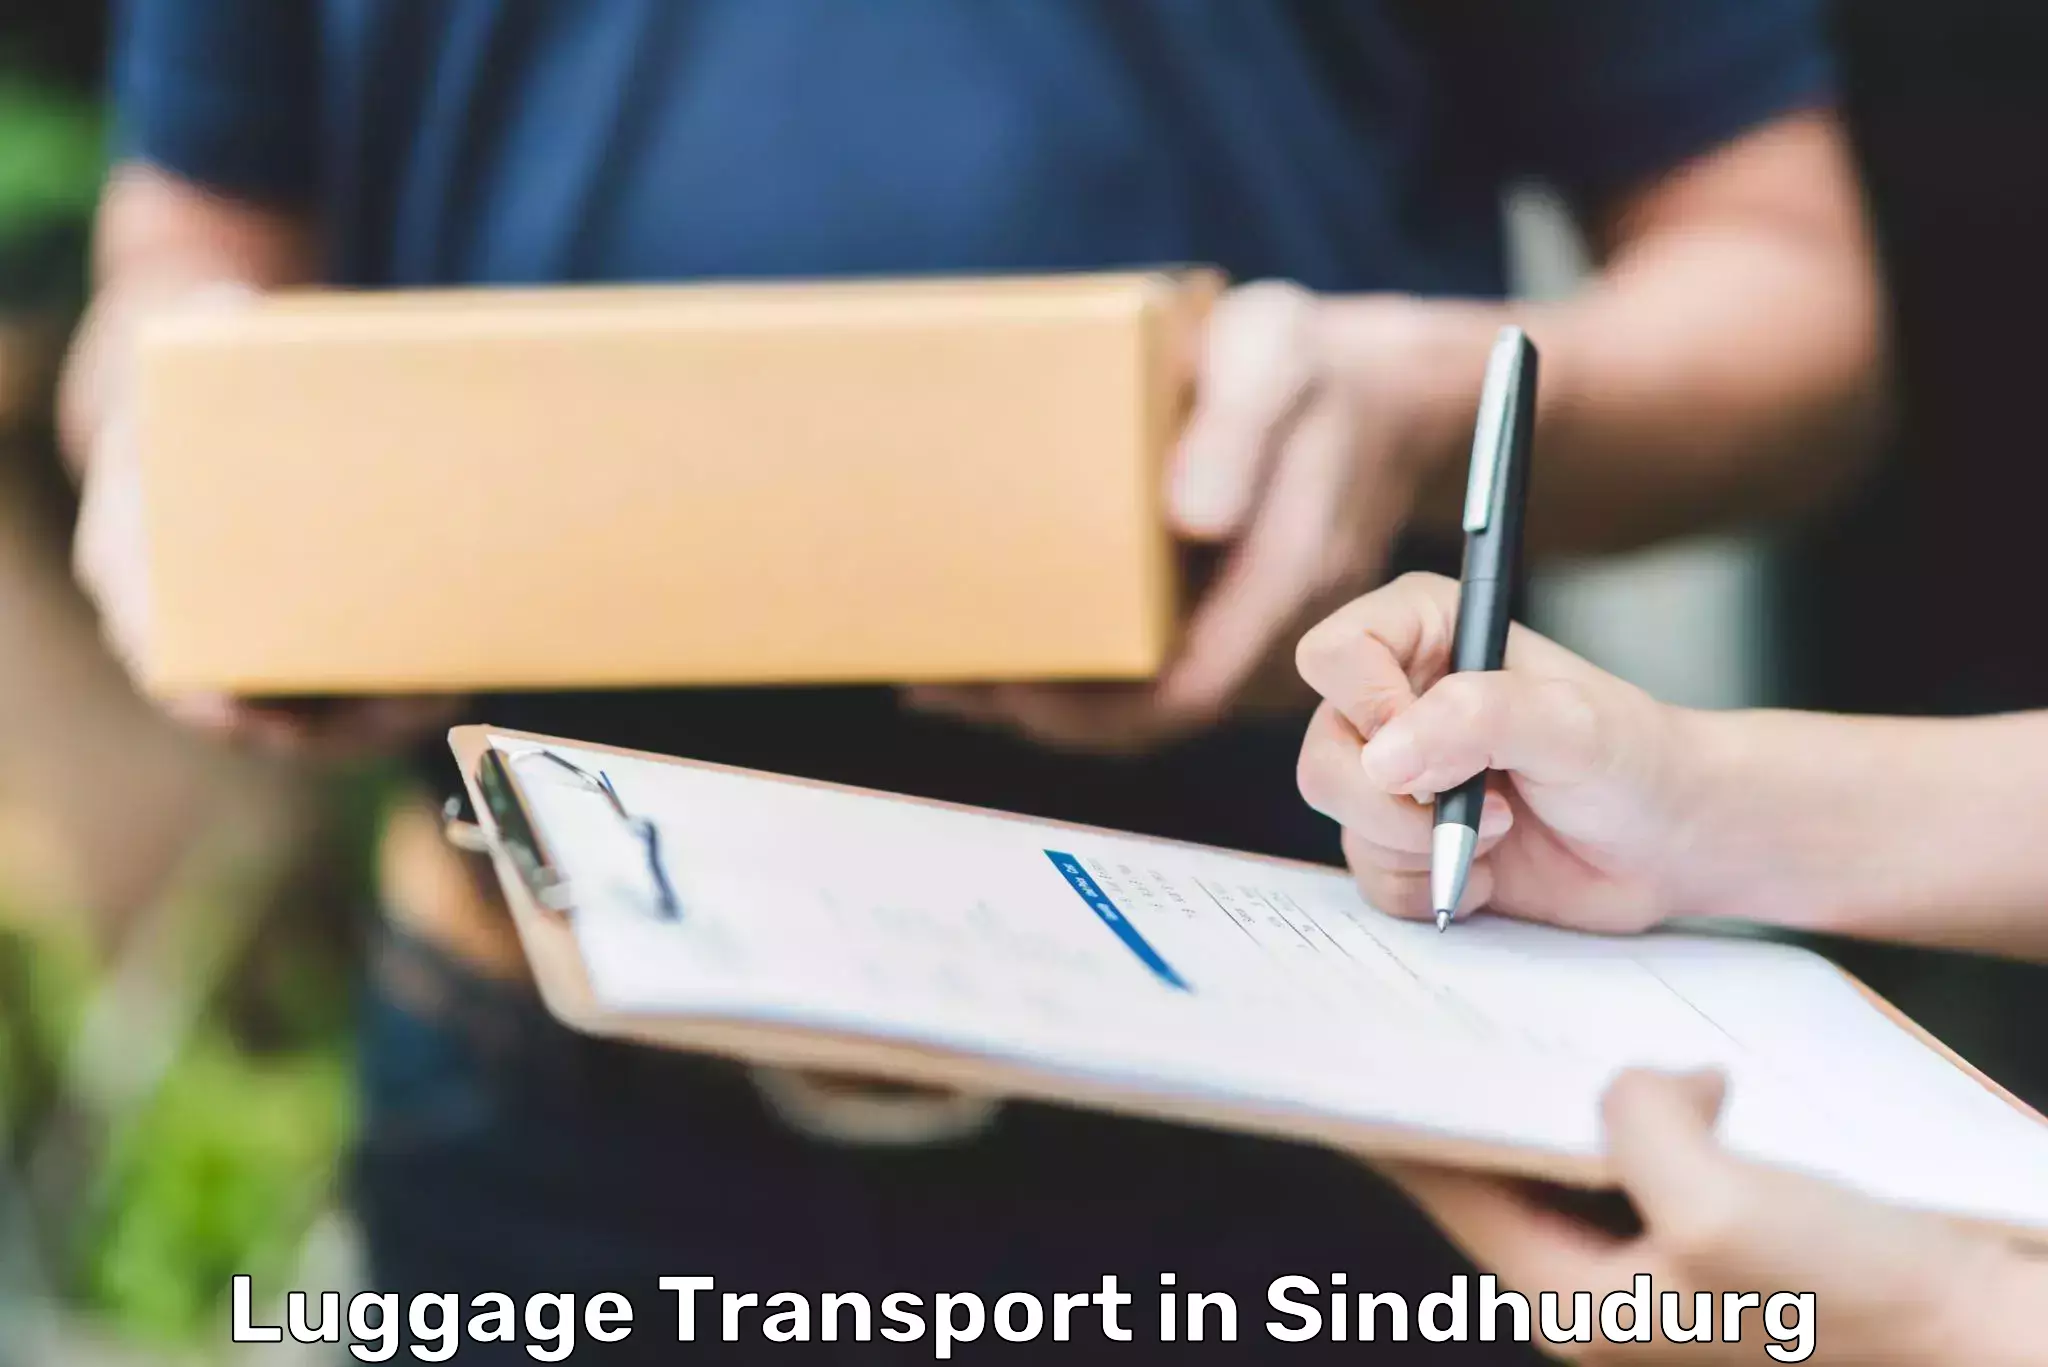 Luggage shipping trends in Sindhudurg